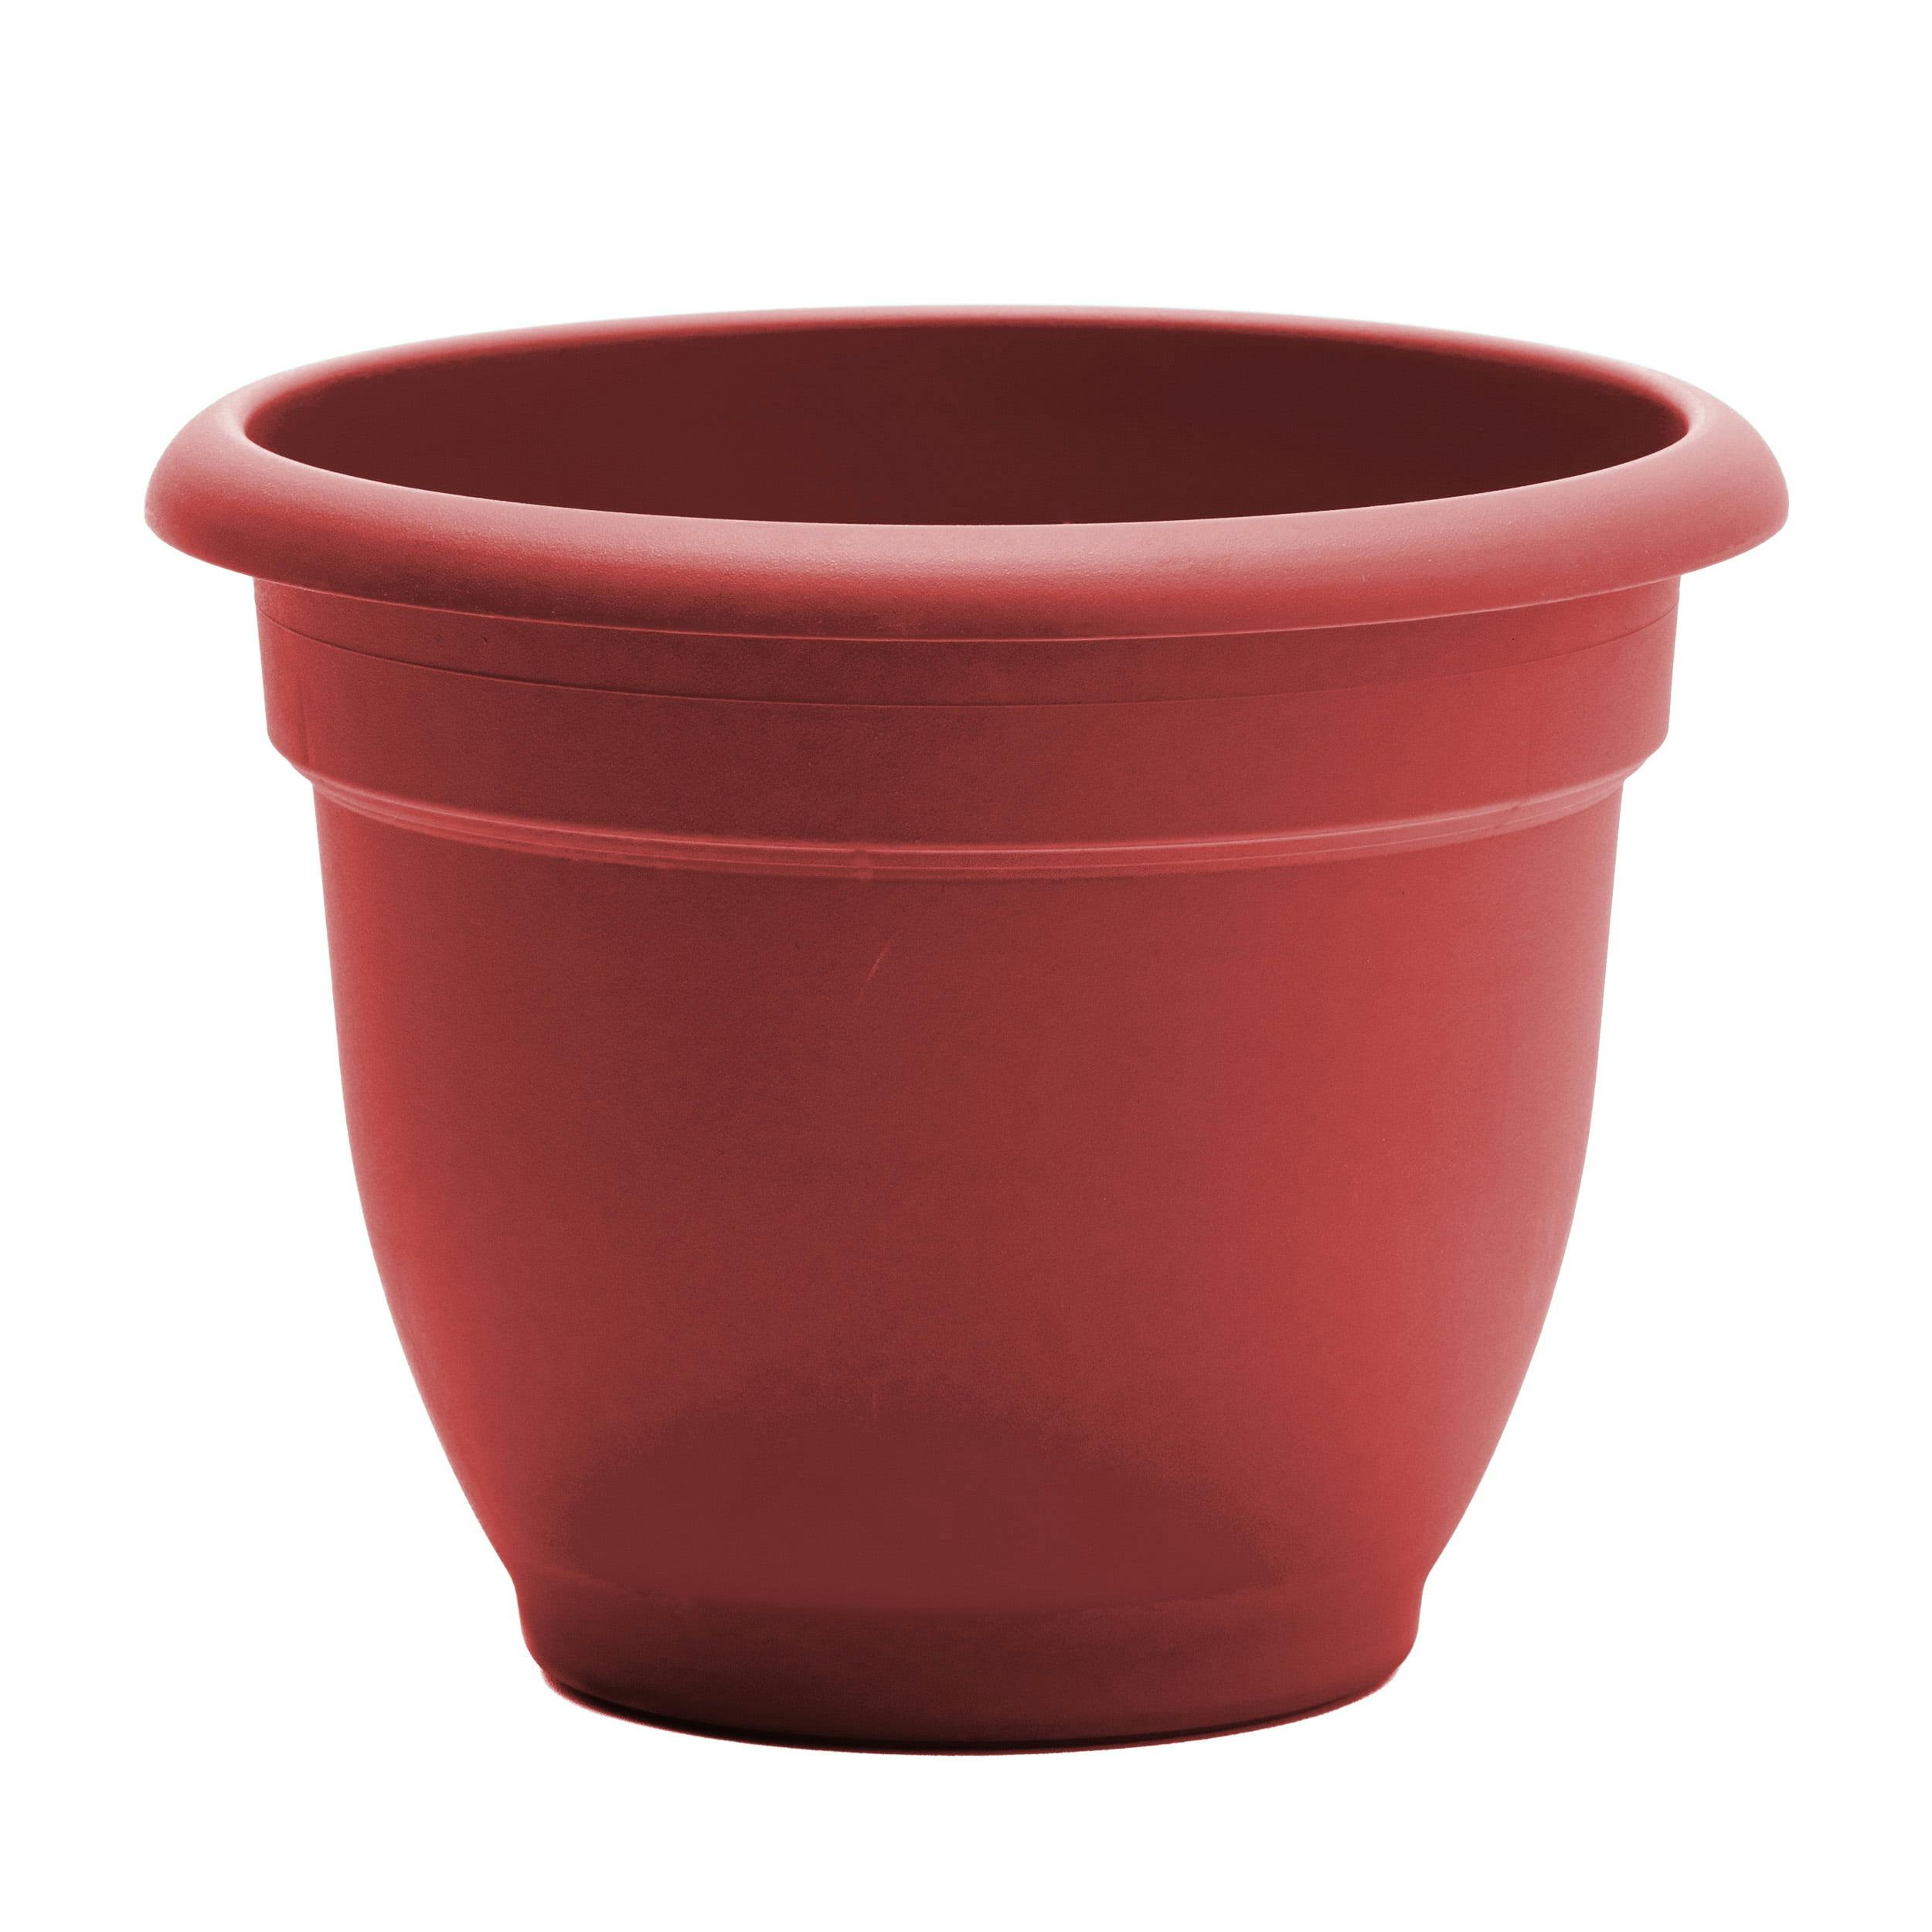 Ariana Bell-Shaped Indoor/Outdoor Planter in Burnt Red, 21.5"